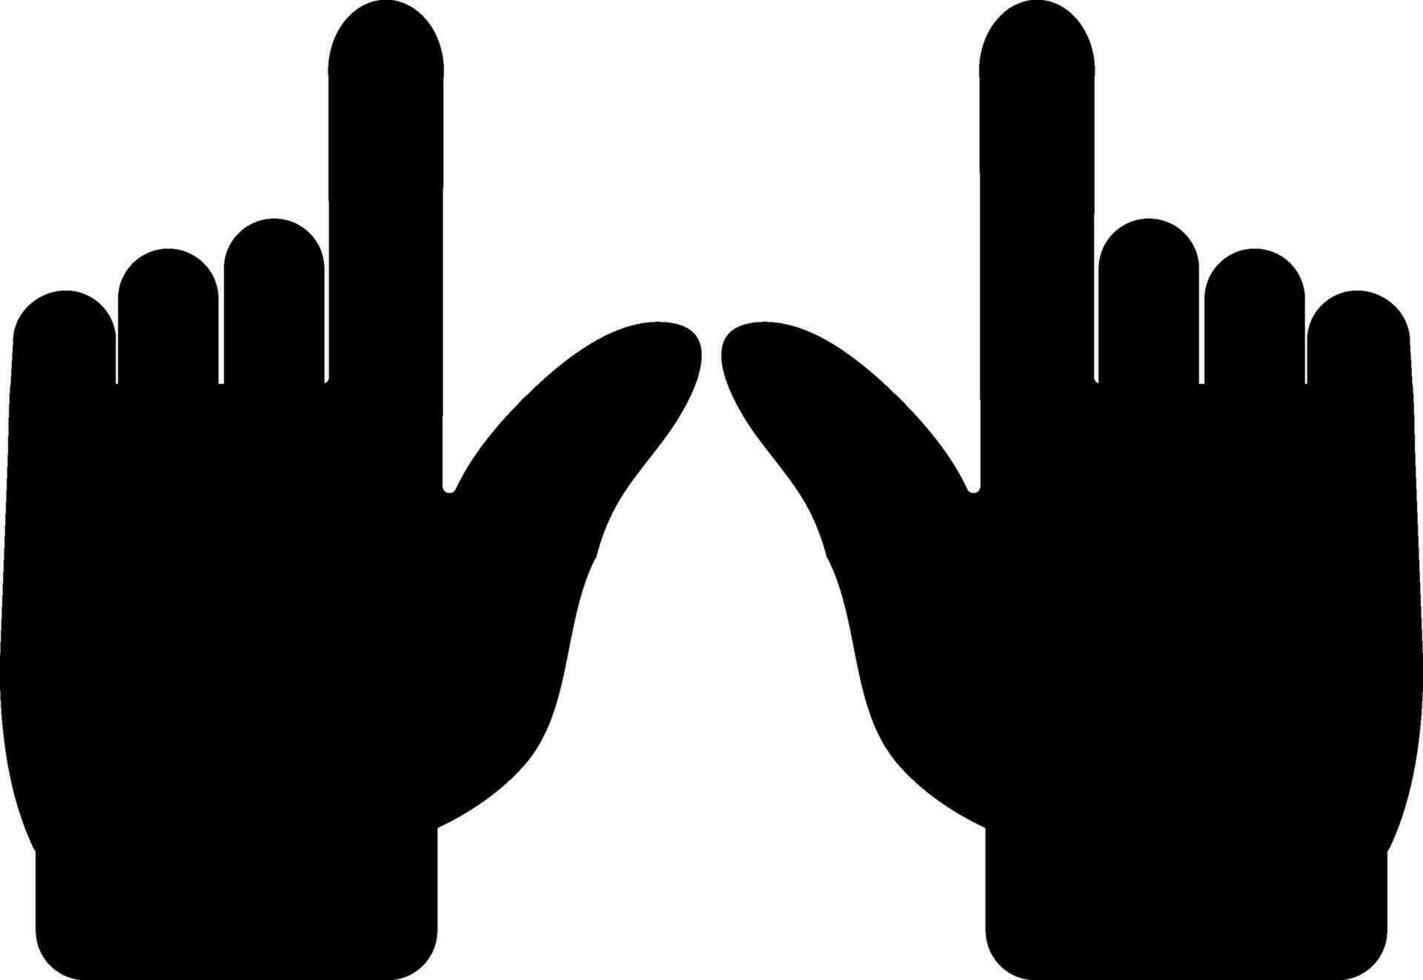 Silhouette of Lens or Frame hand gesture. vector